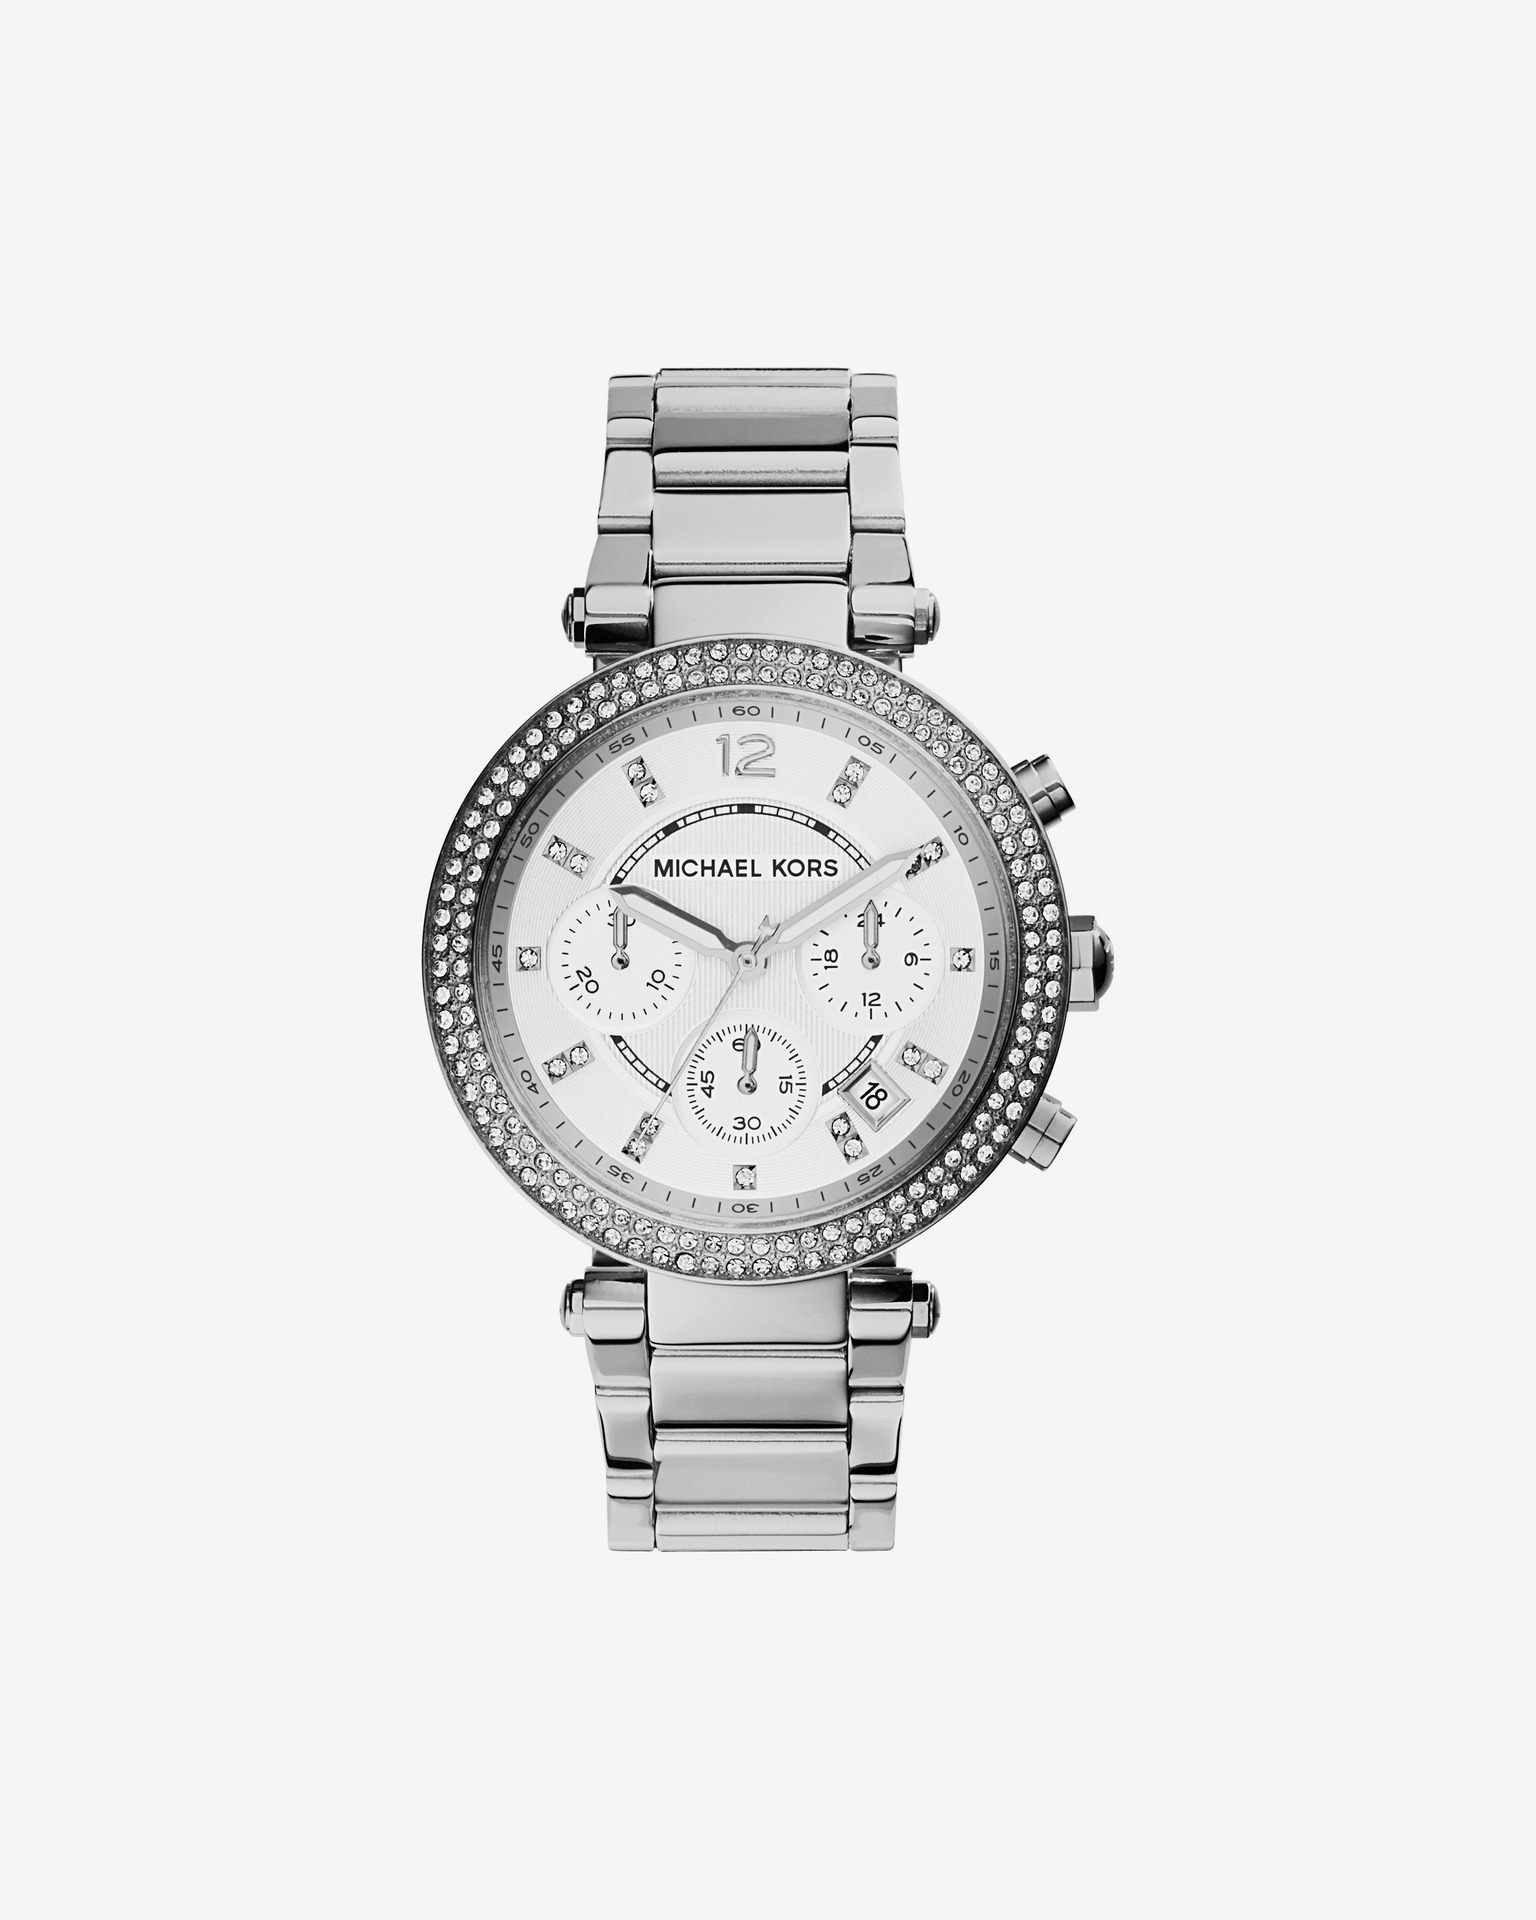 Michael Kors Bradshaw for Rp1337477 for sale from a Private Seller on  Chrono24